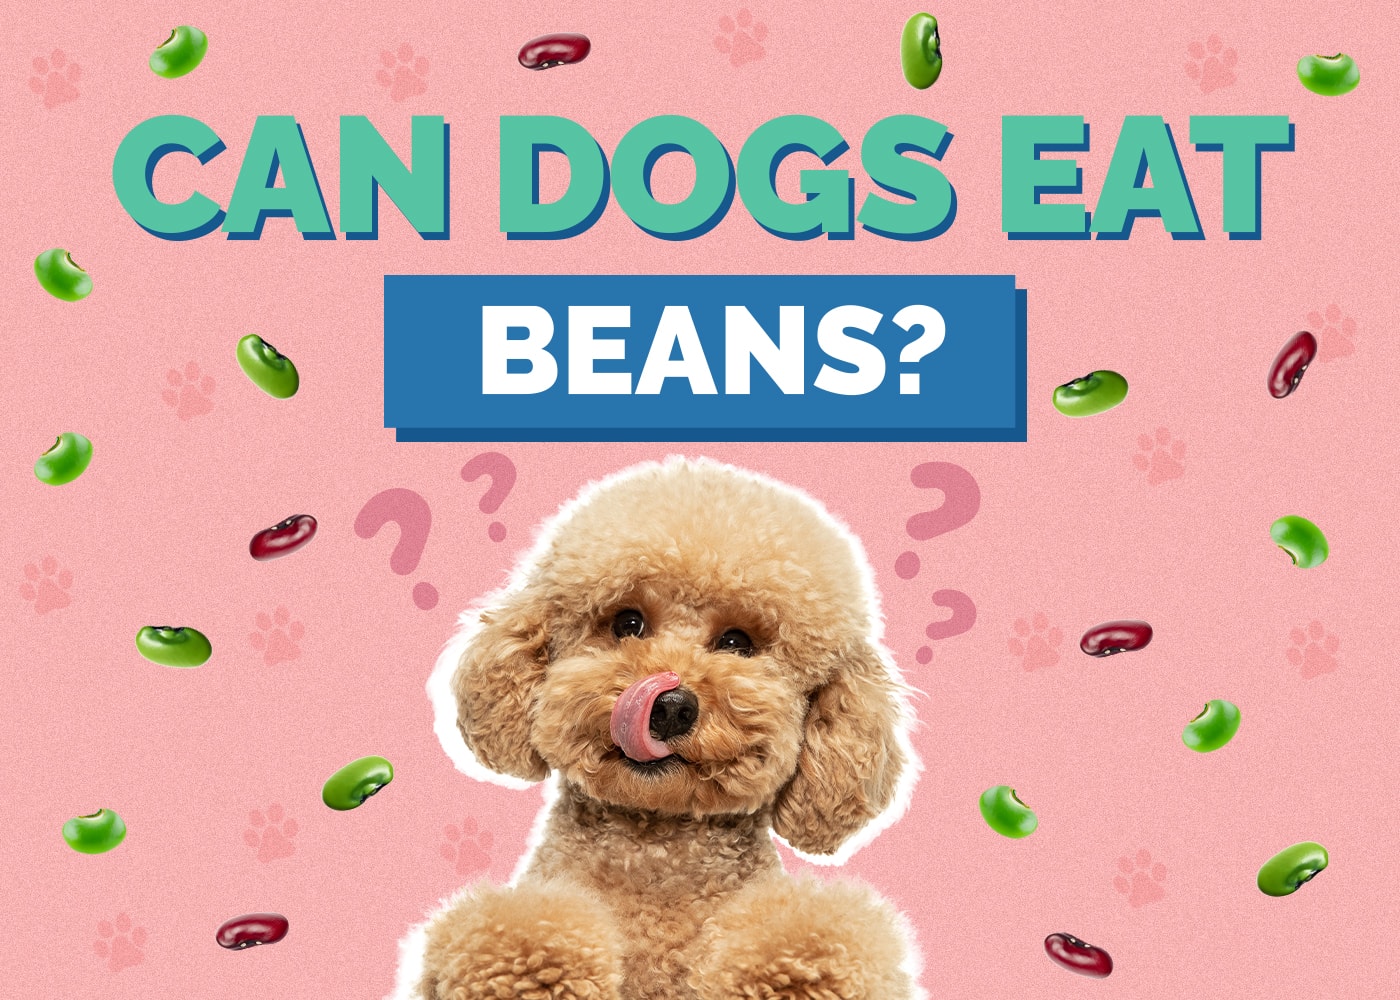 Can Dog Eat beans